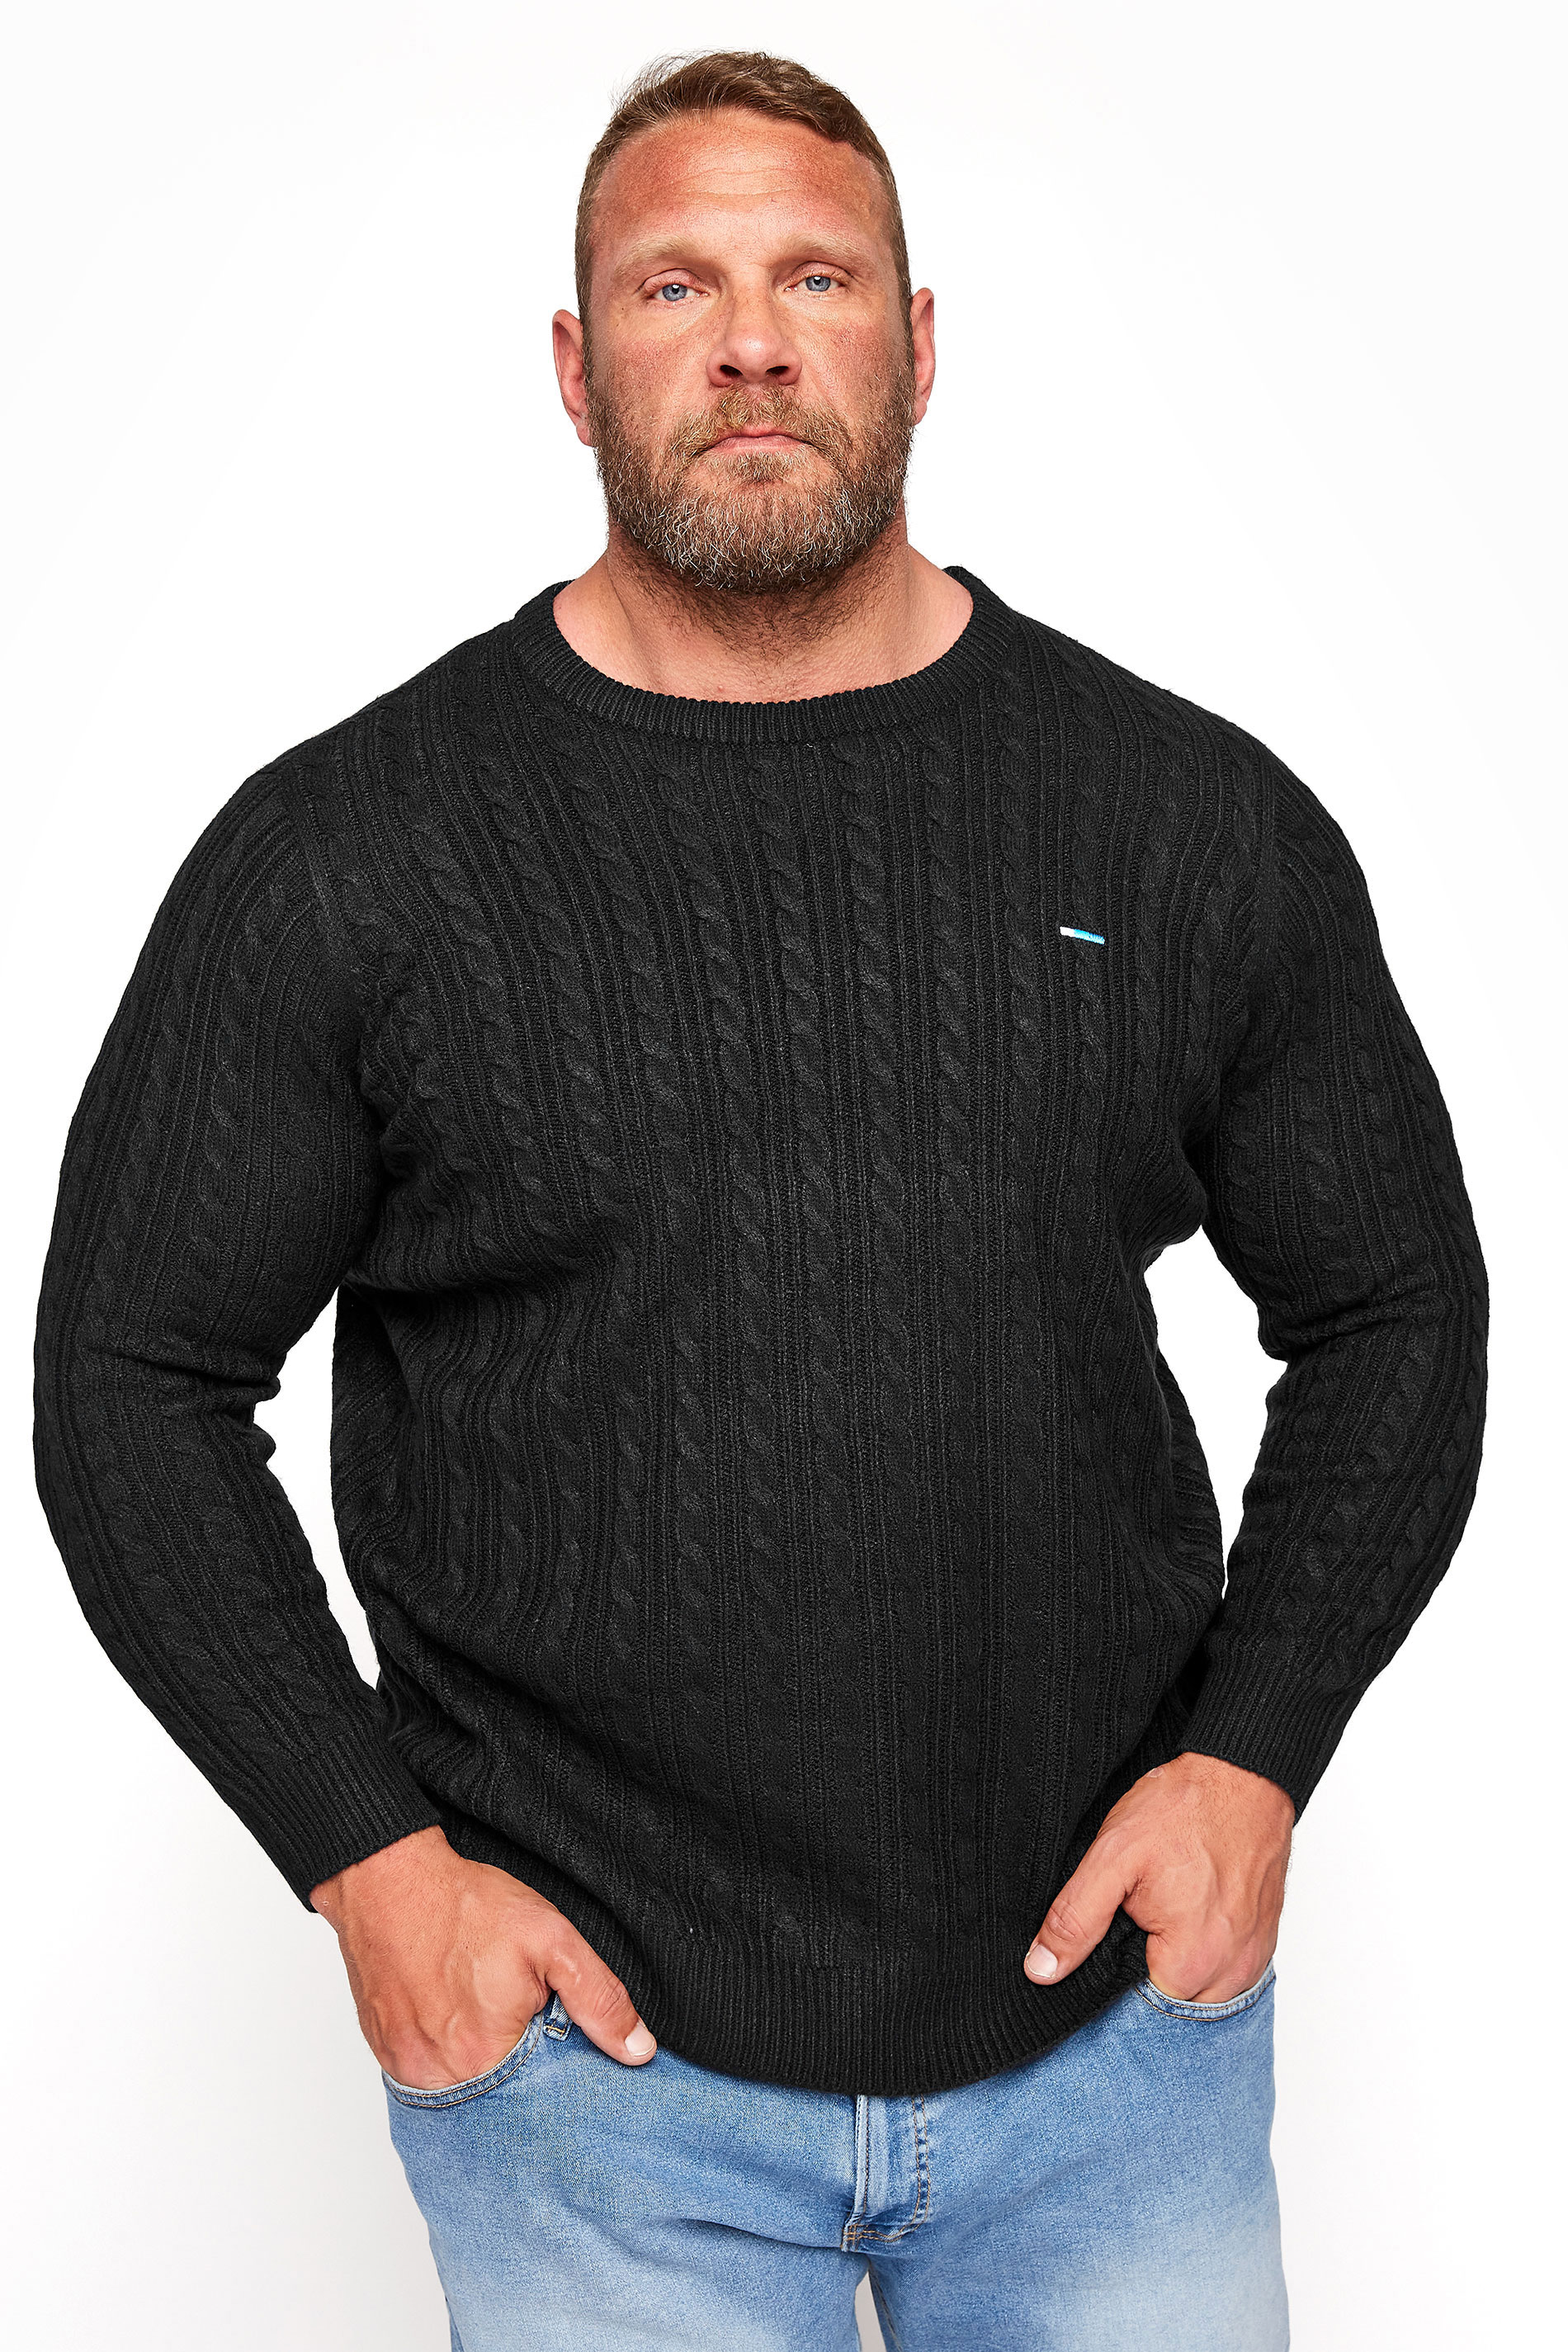 BadRhino Big & Tall Black Essential Cable Knitted Jumper 1